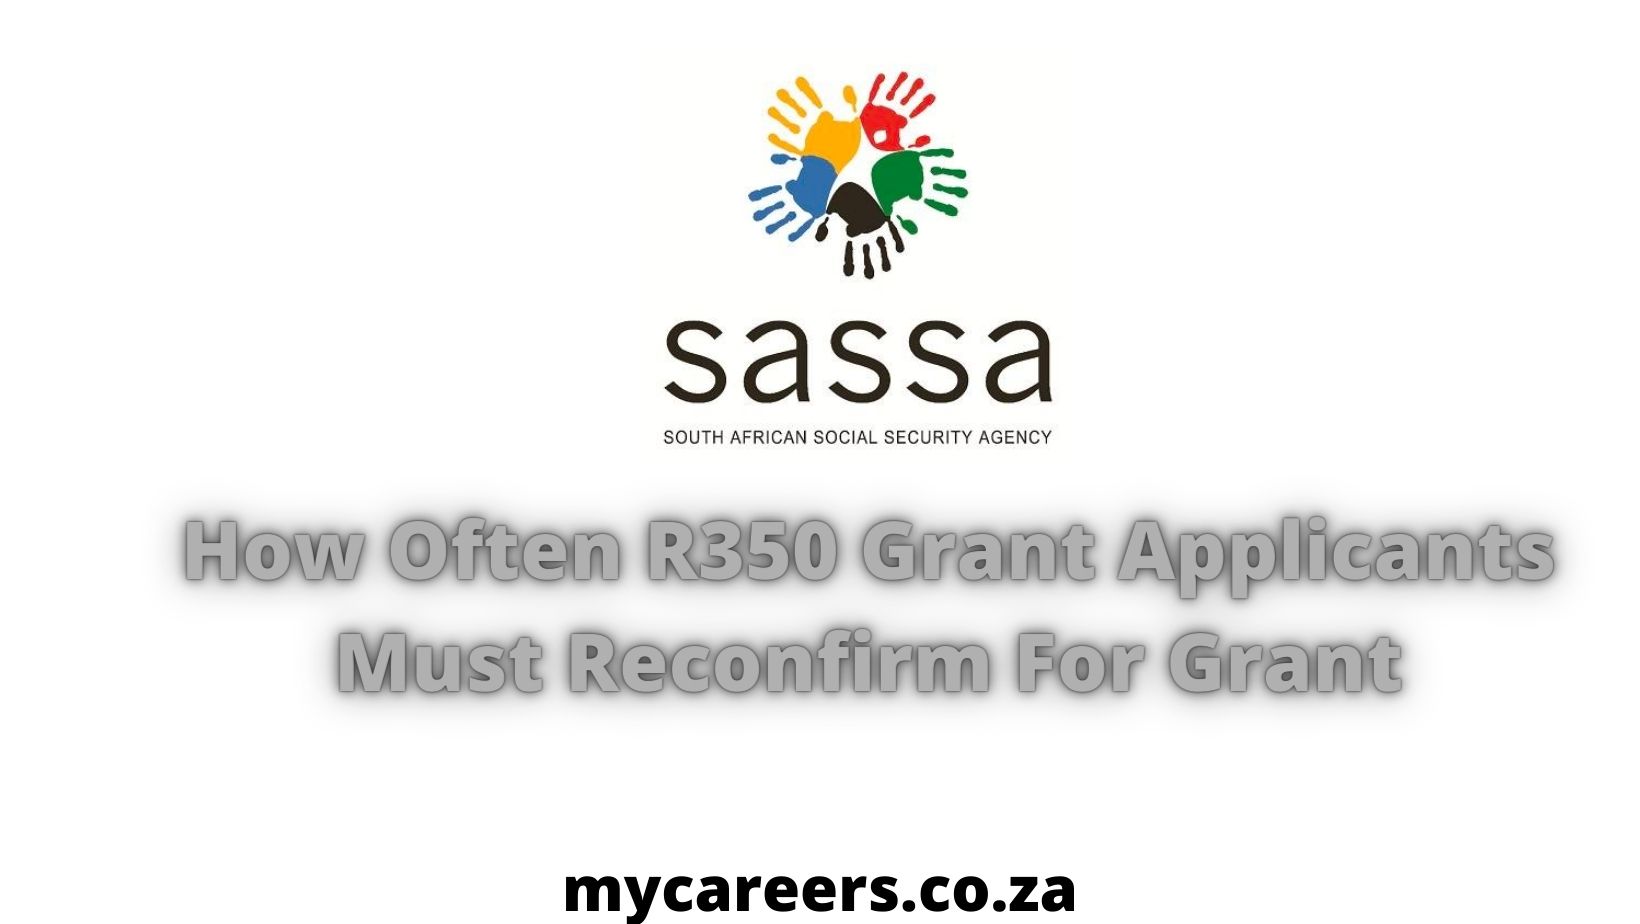 How Often R350 Grant Applicants Must Reconfirm For Grant